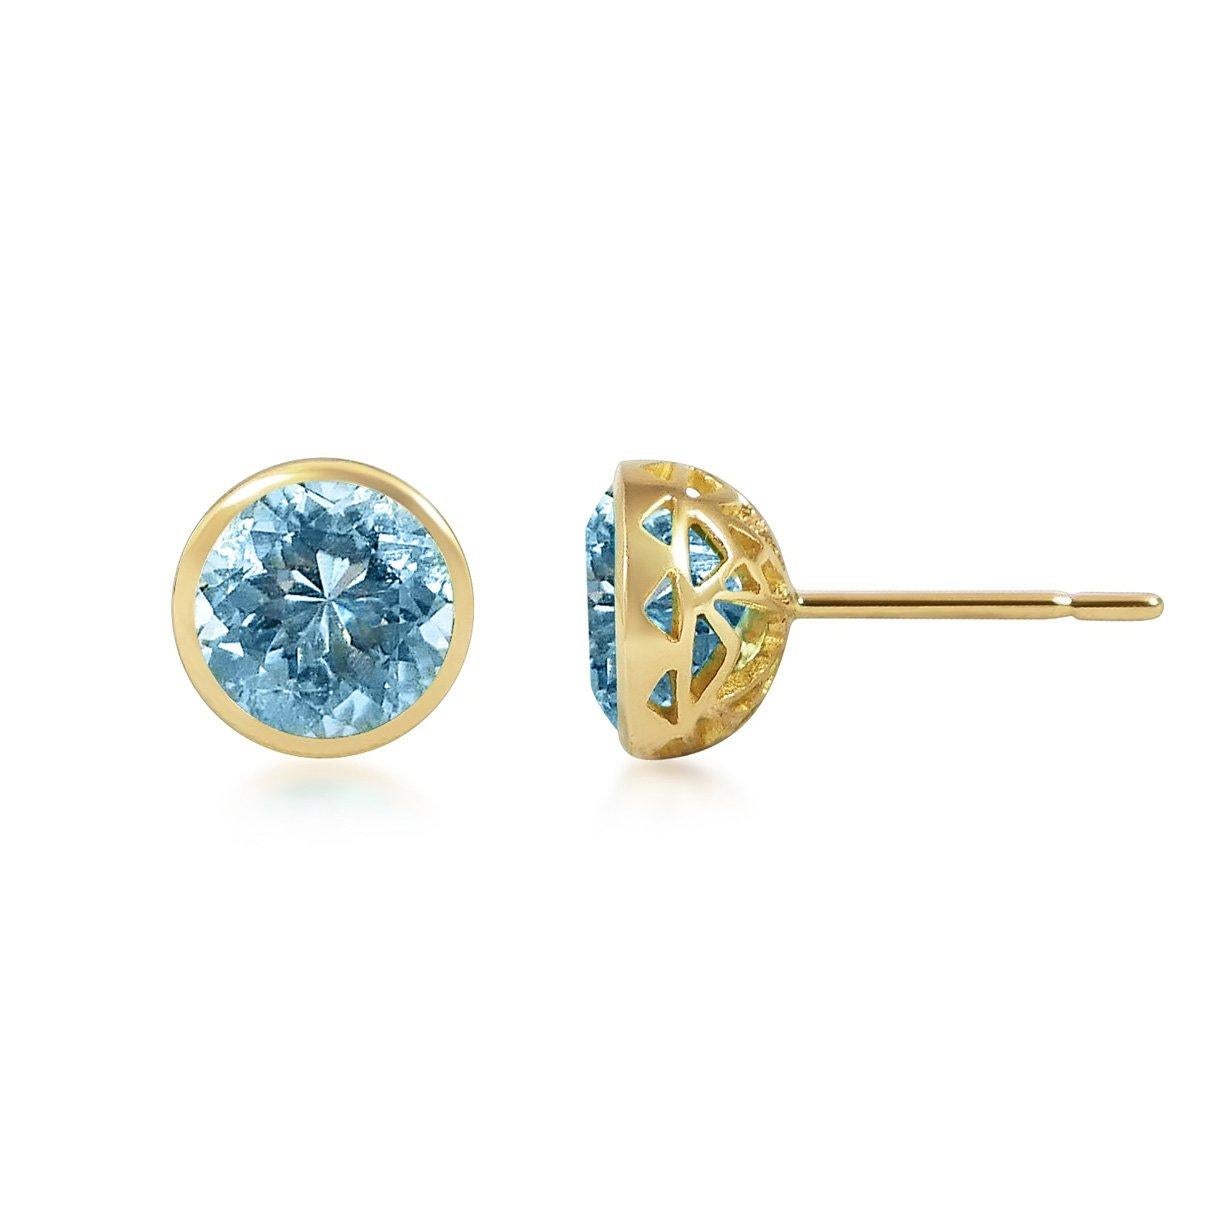 Handcrafted 2.70 Carats Aquamarine 18 Karat Yellow Gold Stud Earrings. The 8mm natural stones are set in our iconic hand pierced gold lace to let the light through our precious and fine stones our earrings are the perfect everyday wear.

Just like